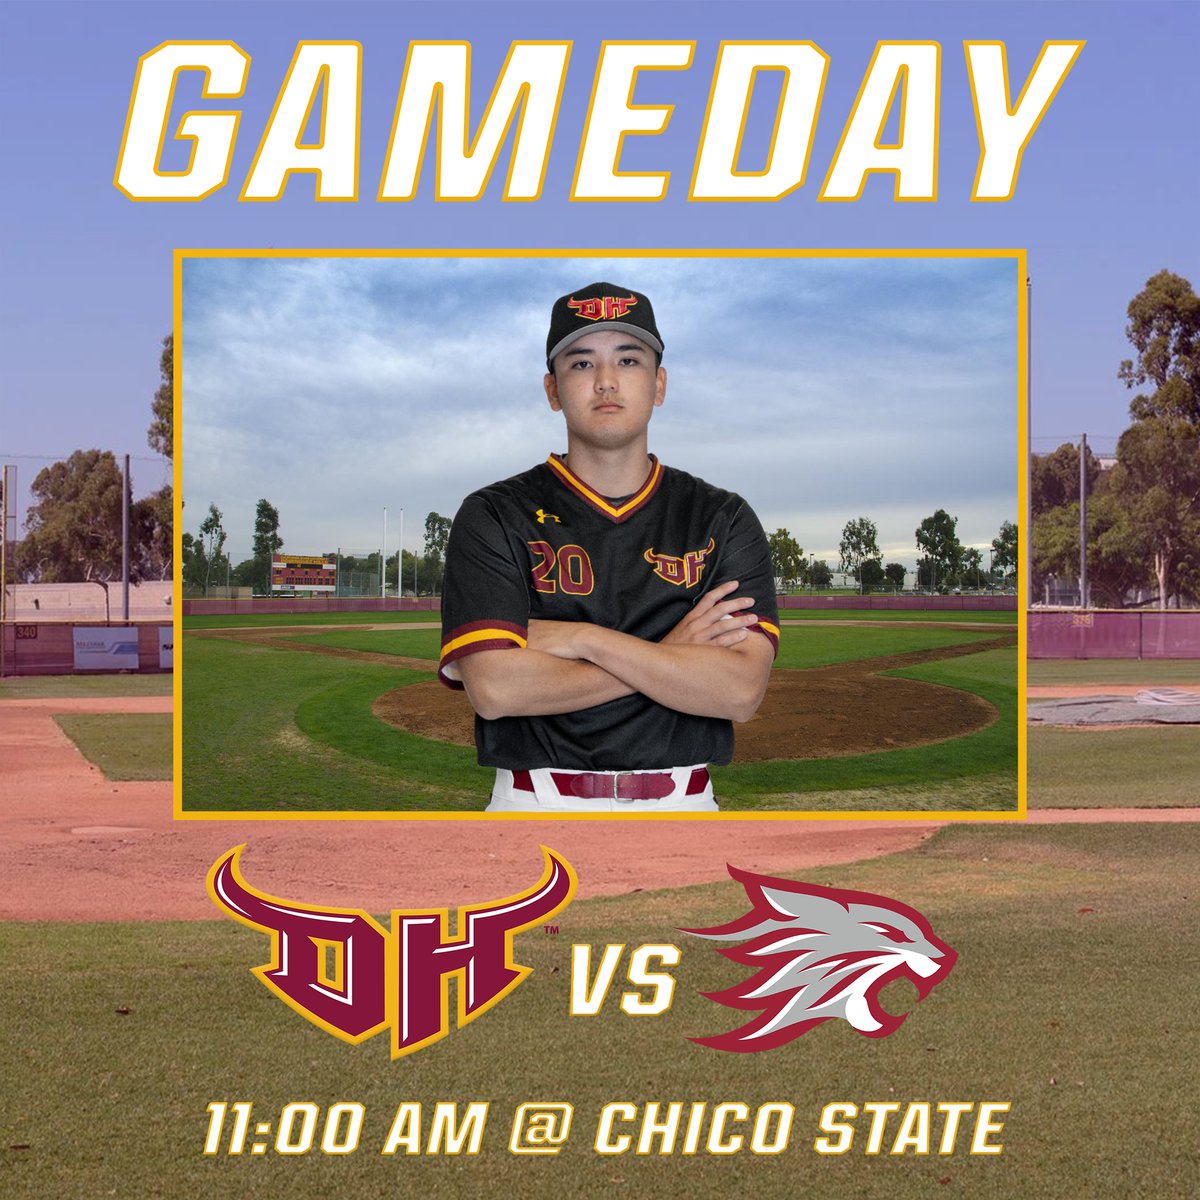 Gameday! @CSUDHbaseball closes their series against Chico State today. ⏰: 11 am 📍: Chico, CA 🏟️: Nettleton Stadium 📺: ccaanetwork.com 📊: bit.ly/3ITeEFe